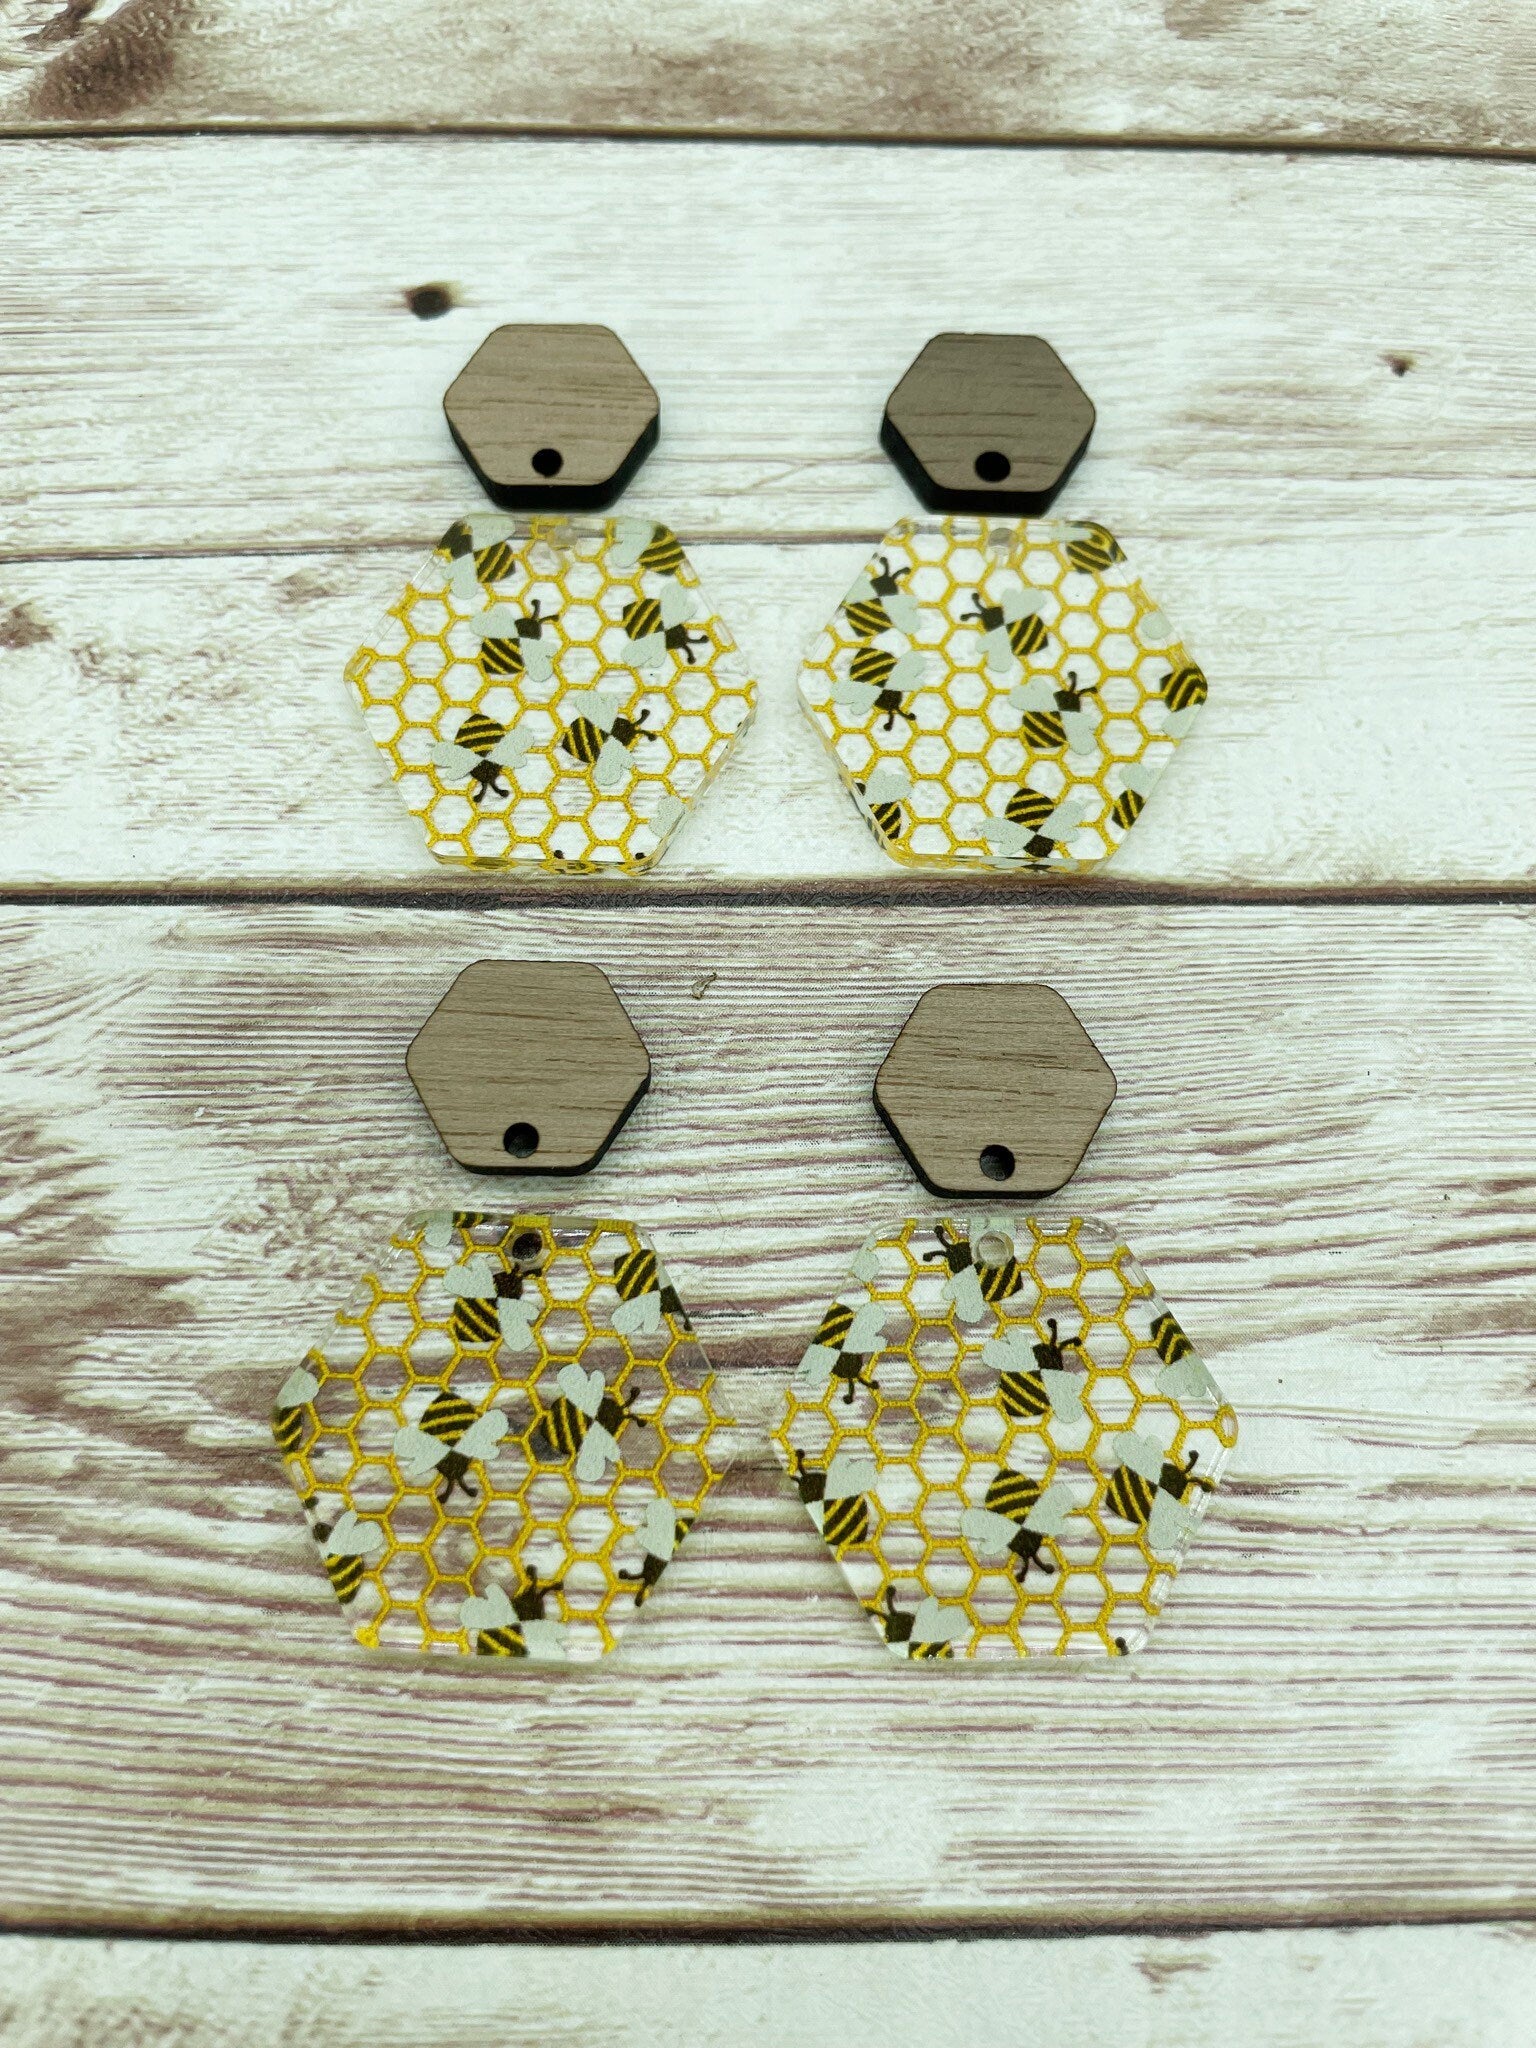 Patterned Acrylic and Wood Bee Print Earring Blanks, DIY Jewelry